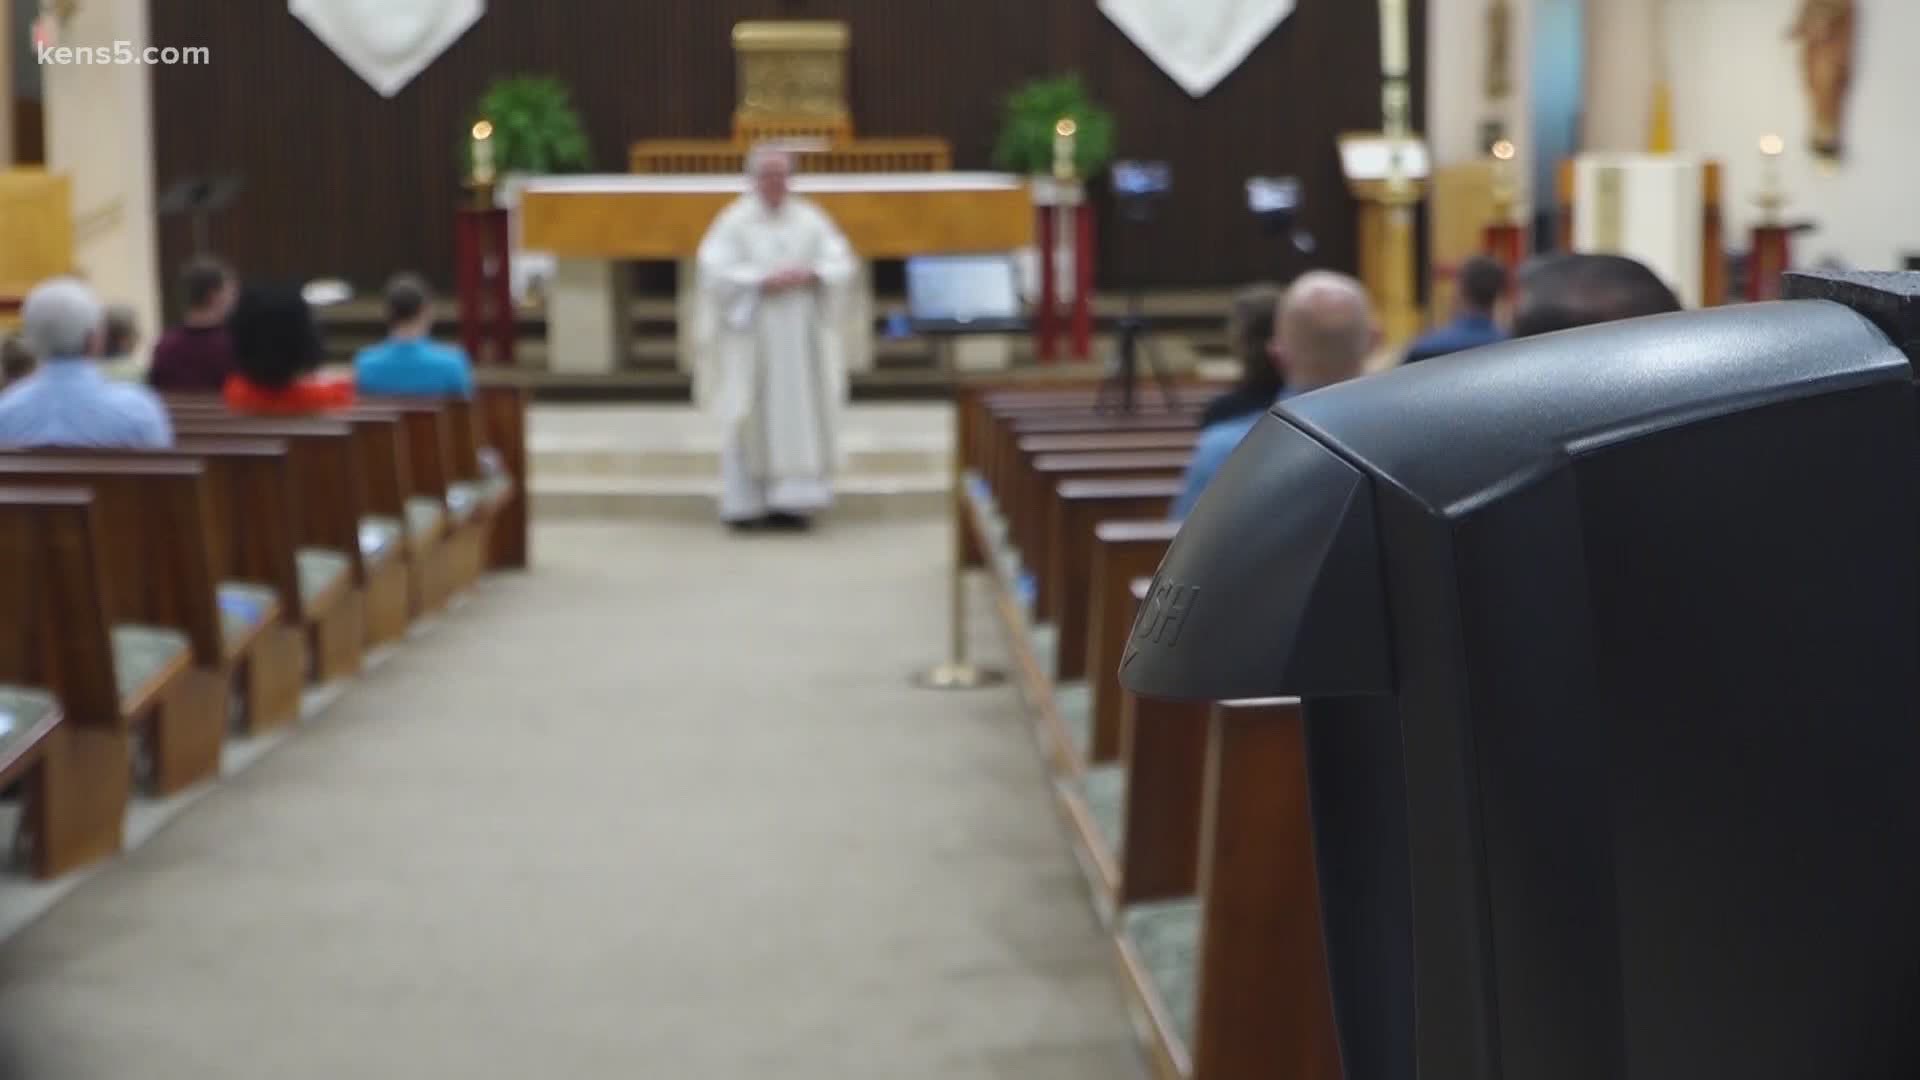 As parishioners reunited in socially distanced Sunday services, they say there was a sense of community that live-streamed mass didn't provide.